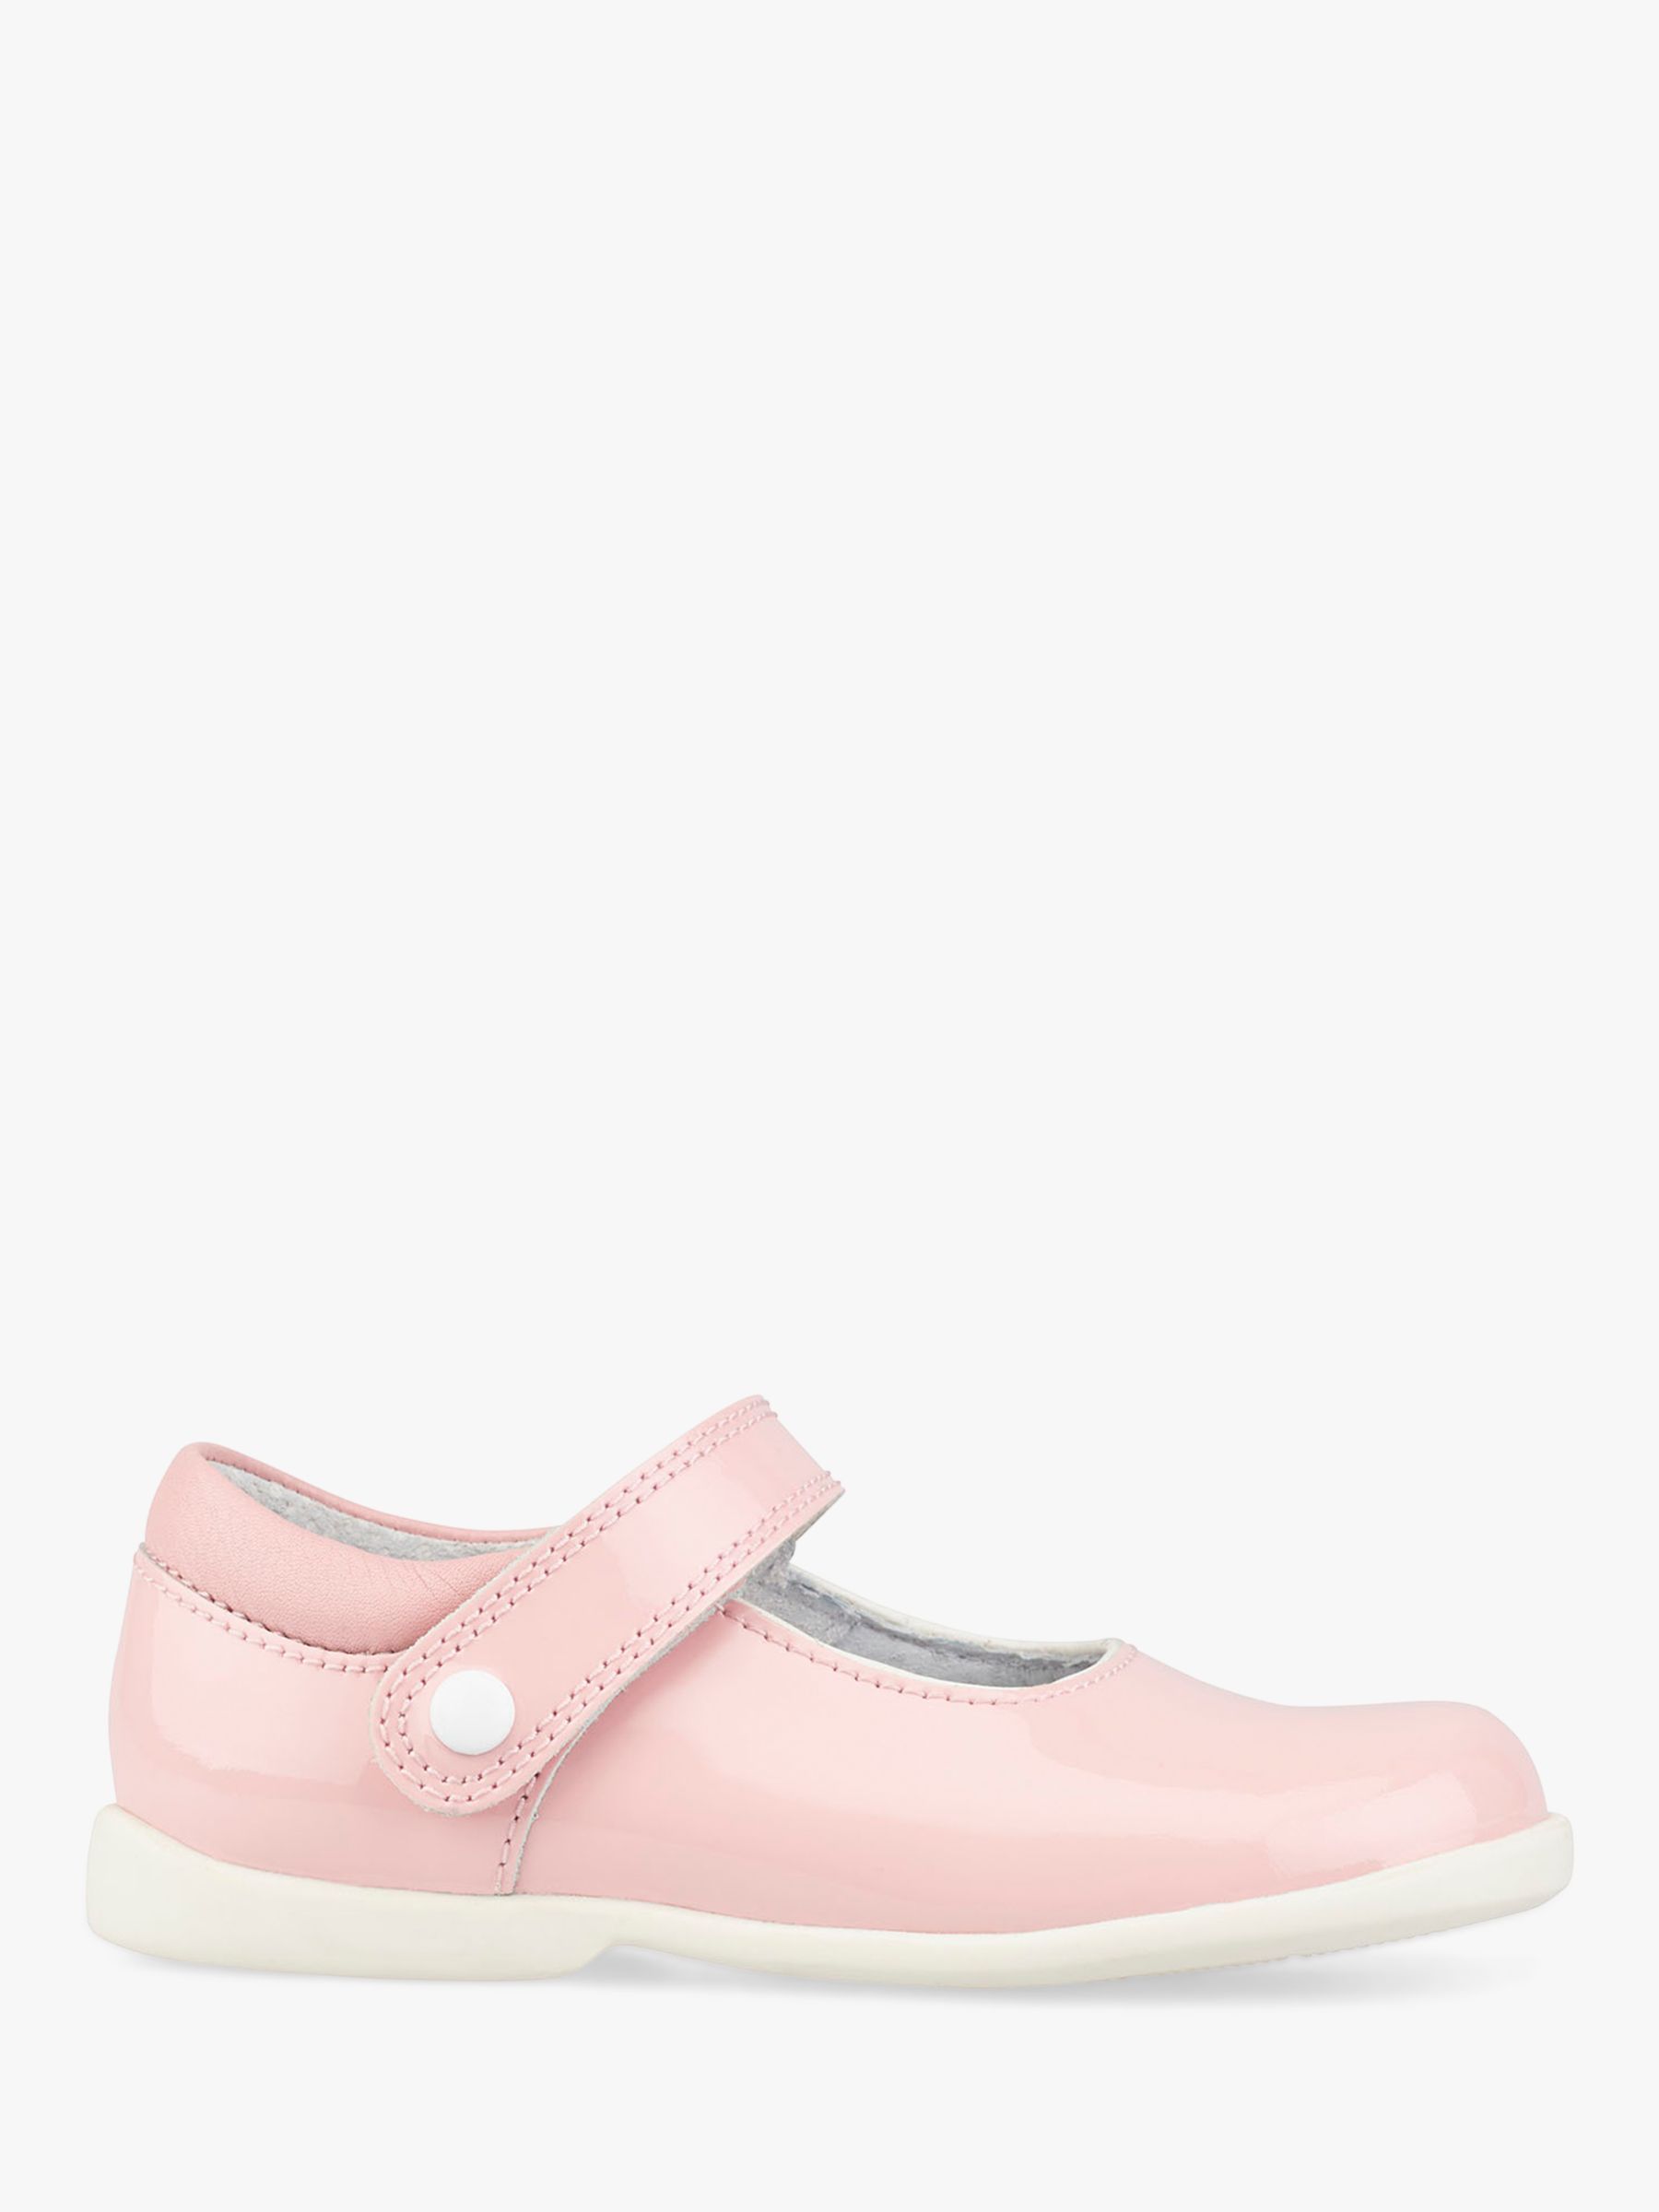 pale pink patent shoes